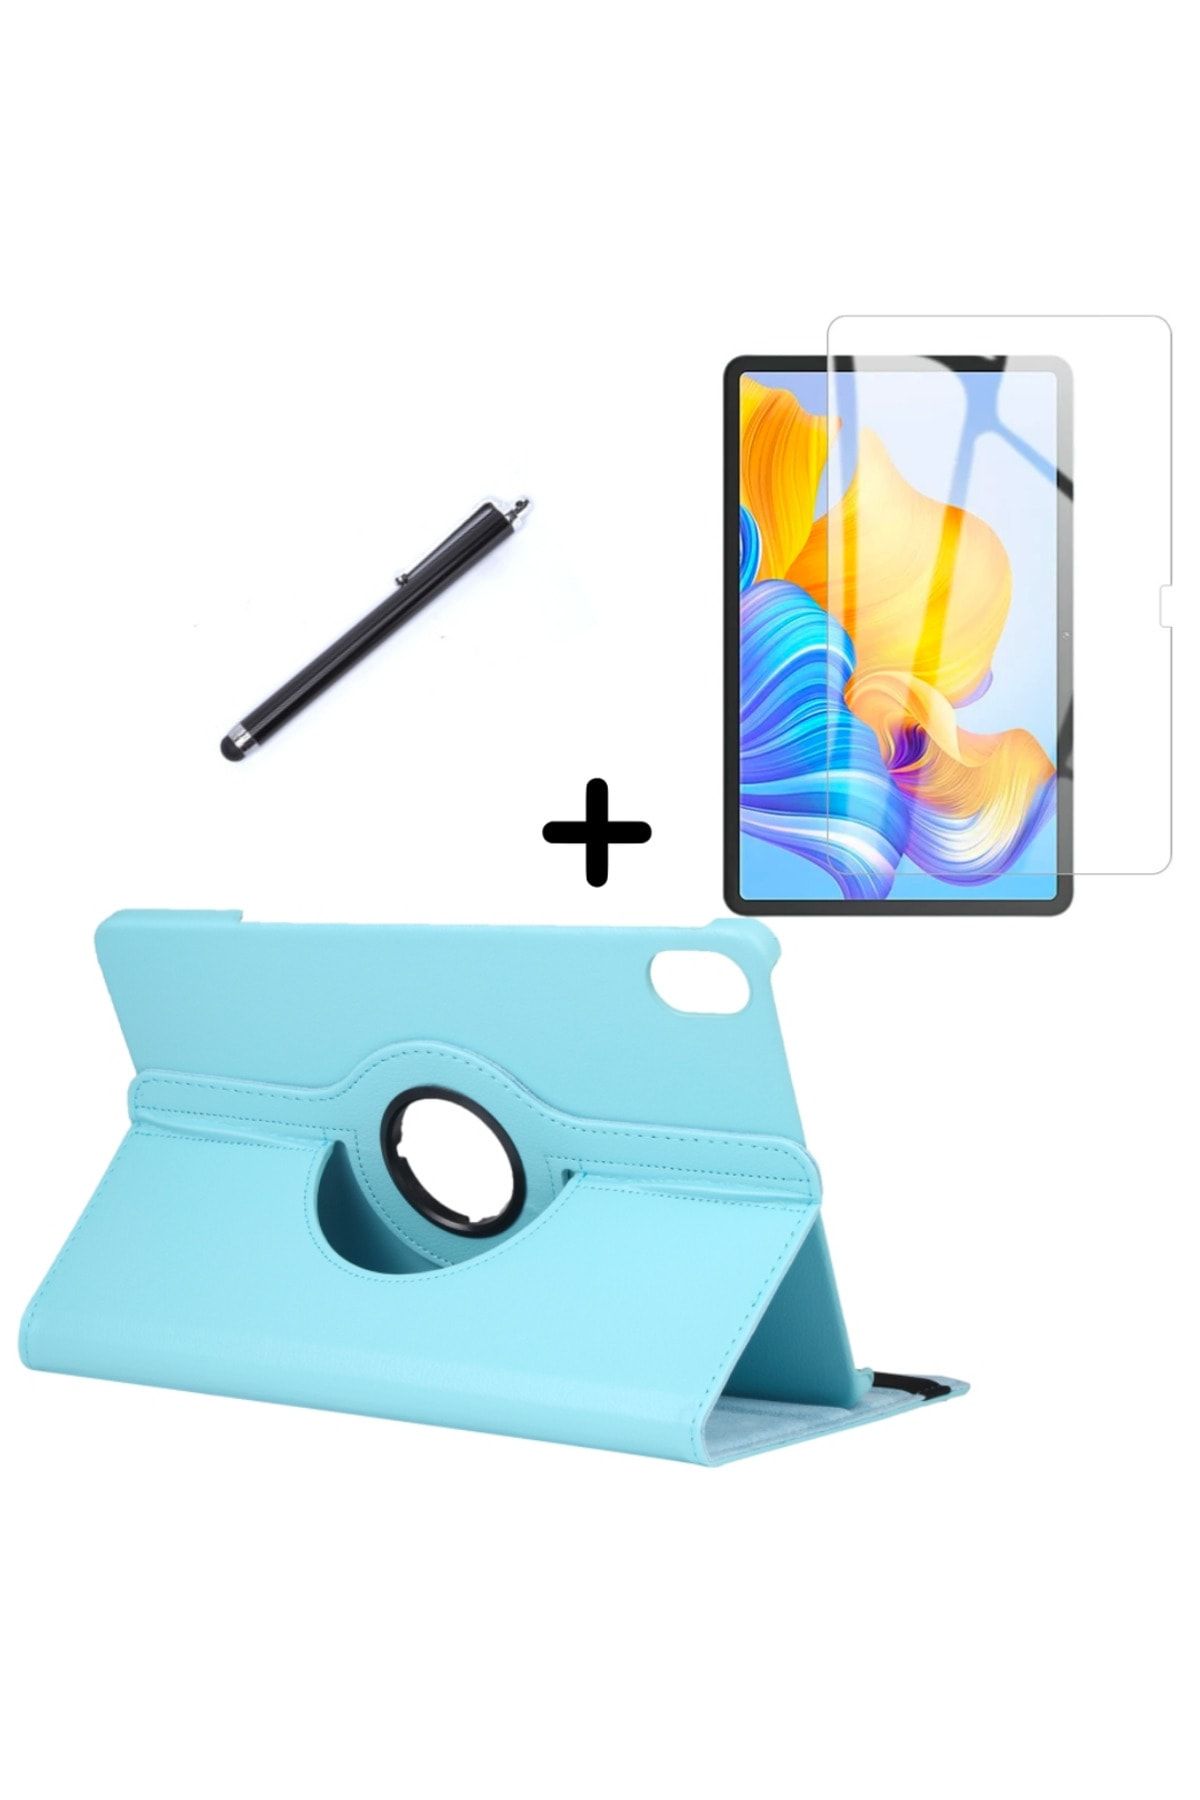 wowacs Huawei Honor Pad 8 12 Inch Compatible 360° Rotatable Stand Tablet  Case Screen Protector and Pen Set - Trendyol